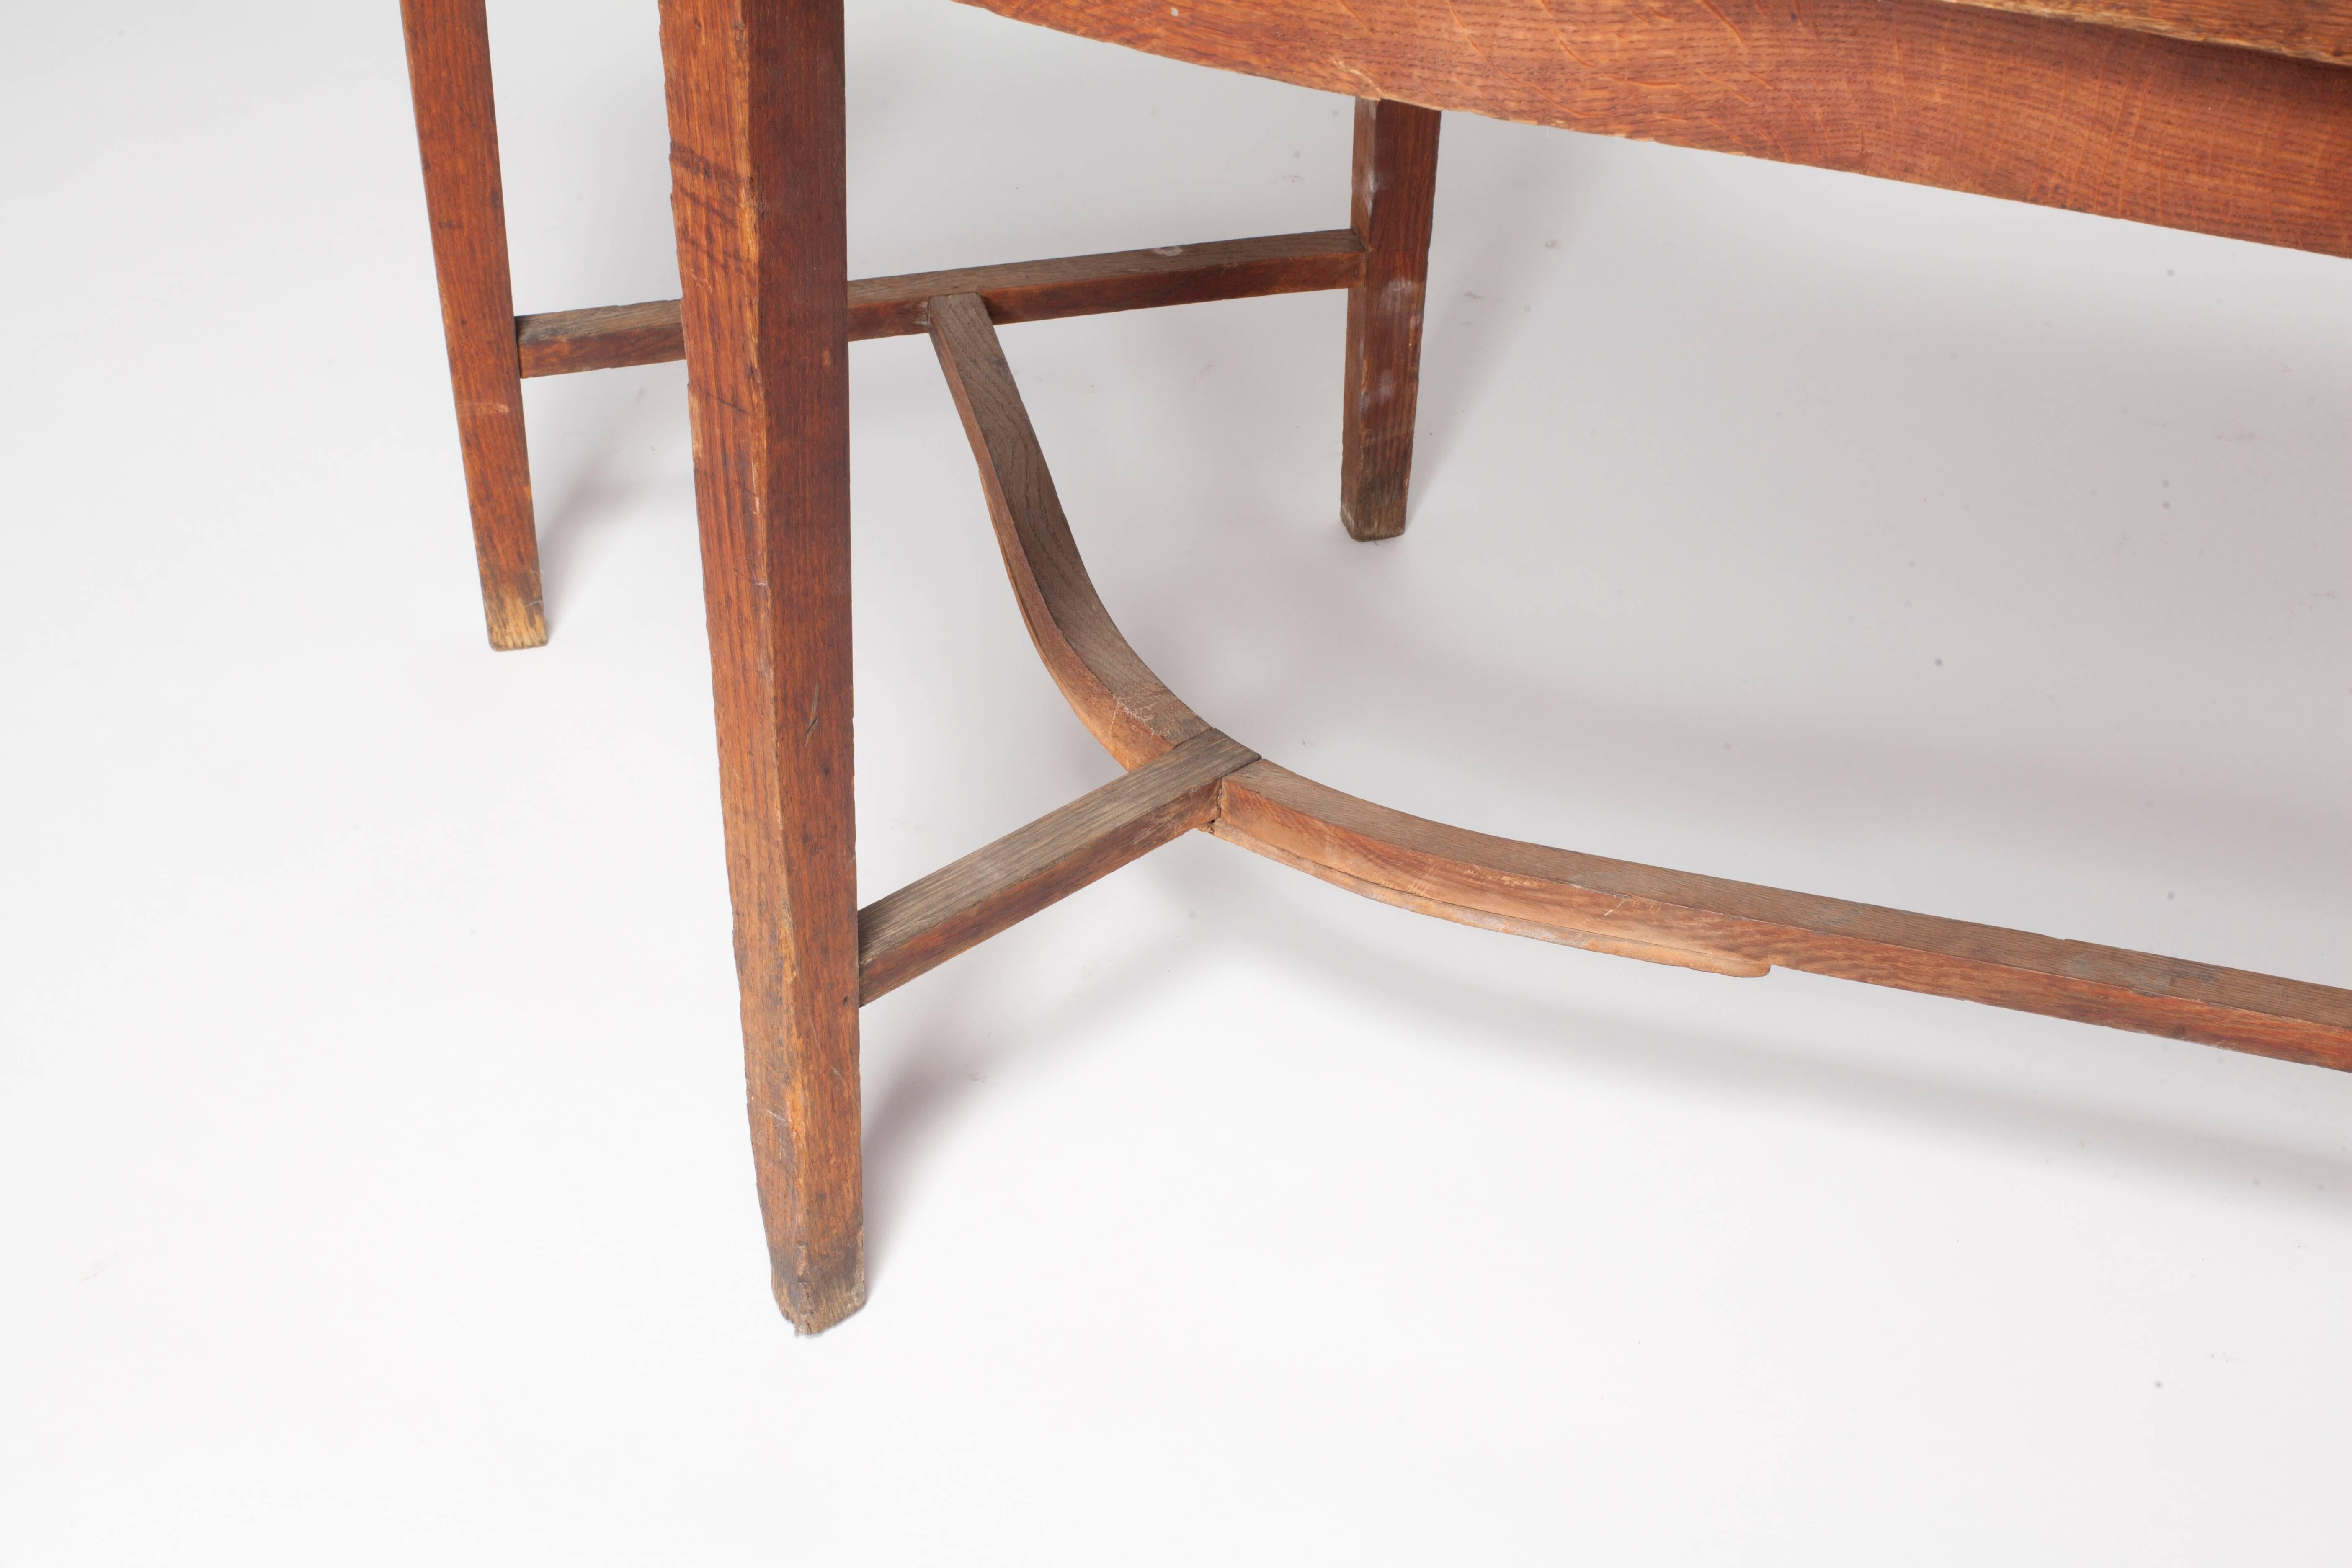 Vintage French oak curvilinear sorting table with tall tapered legs with lower stretcher.